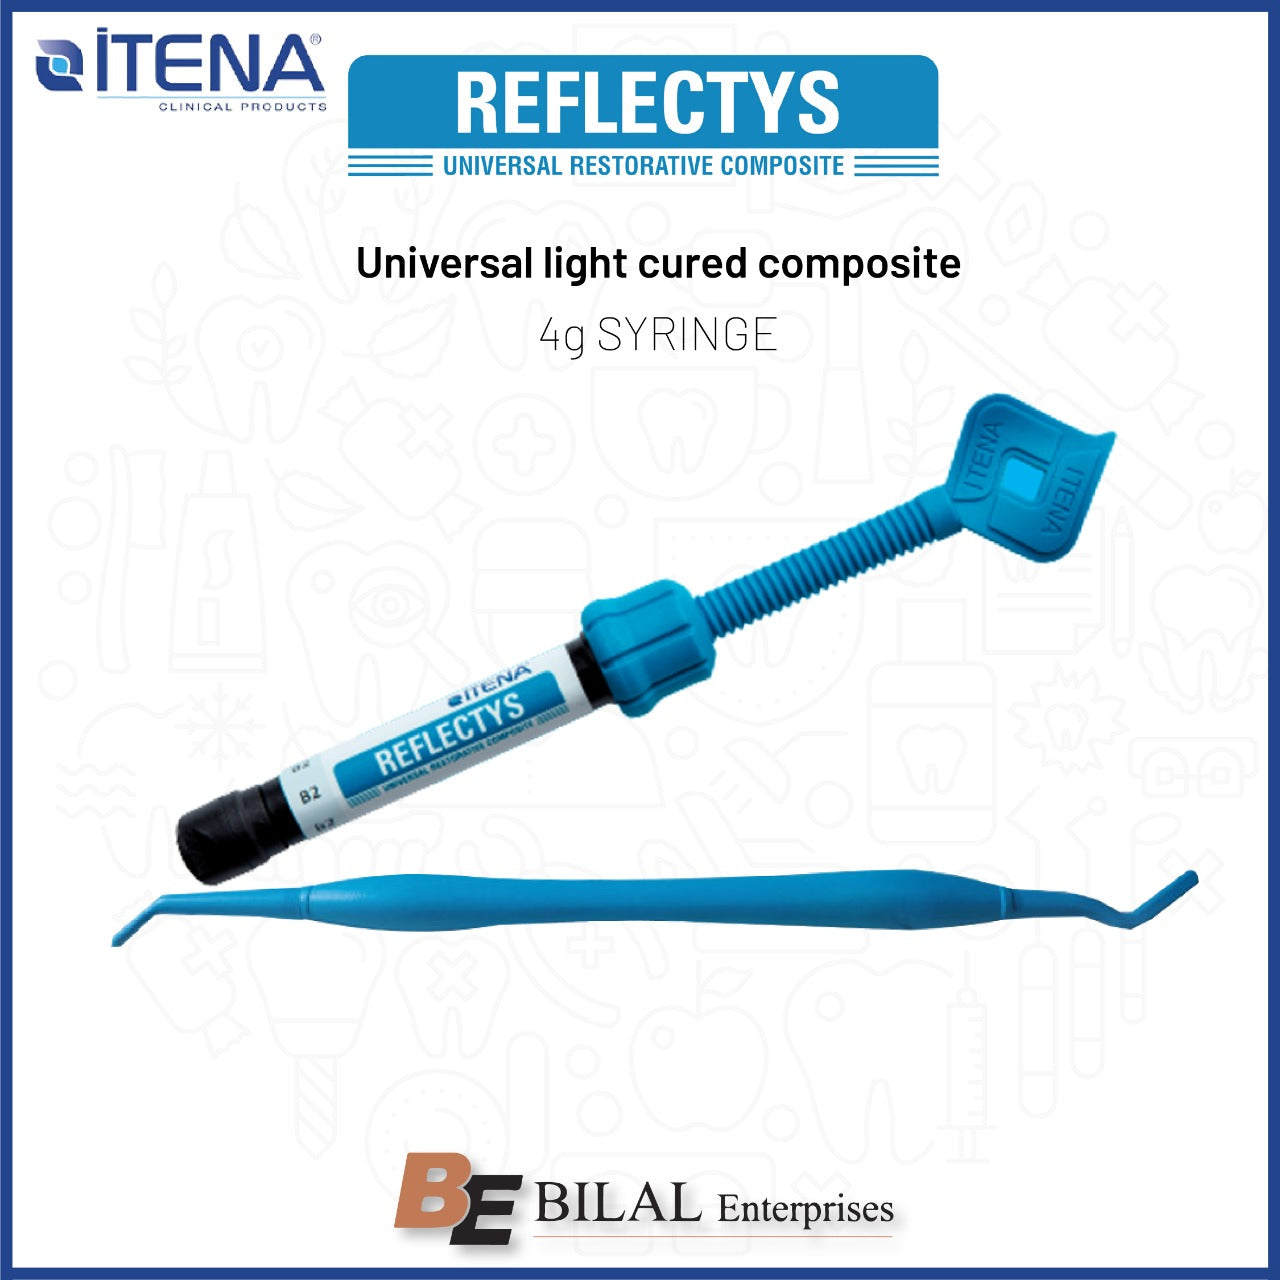 Itena Clinical - Reflectys Universal Composite (4g)